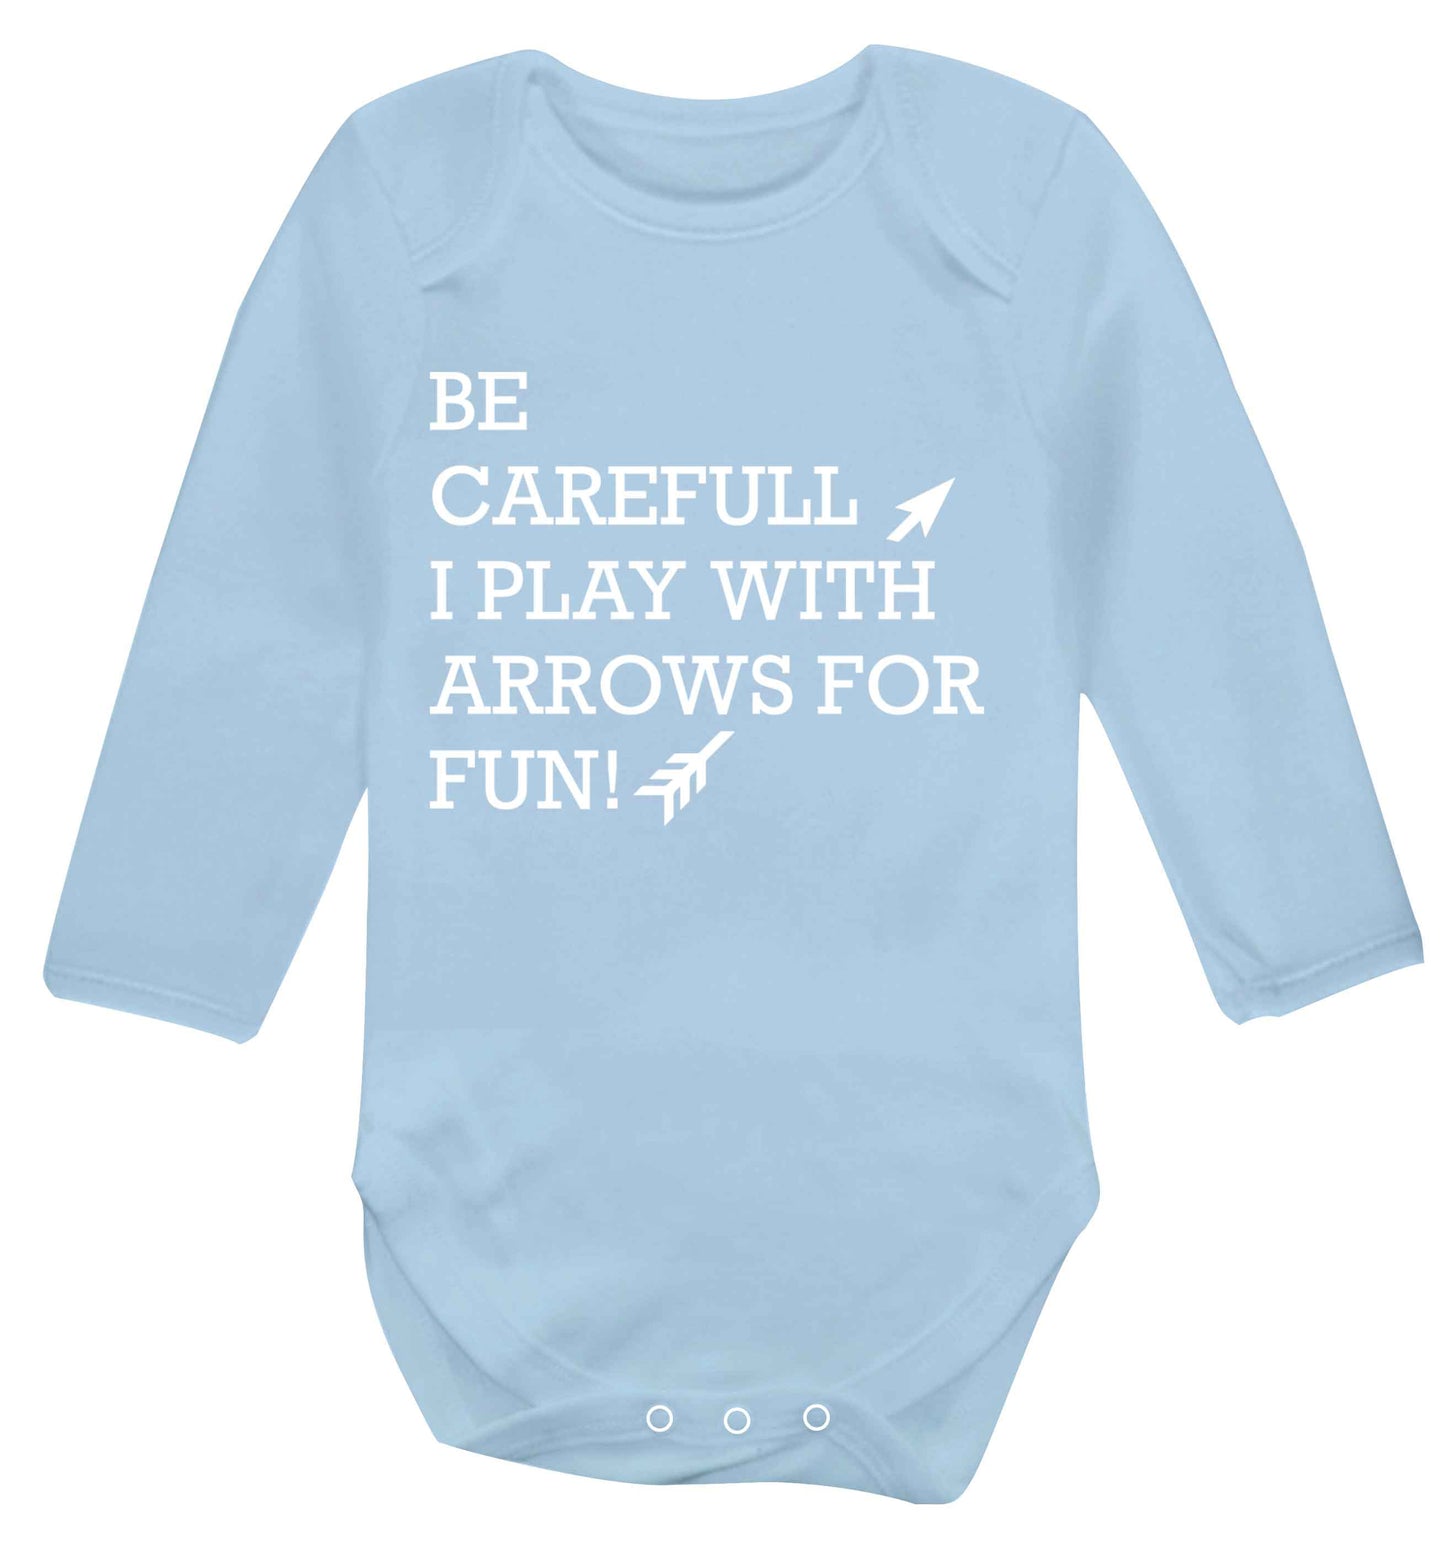 Be carefull I play with arrows for fun Baby Vest long sleeved pale blue 6-12 months